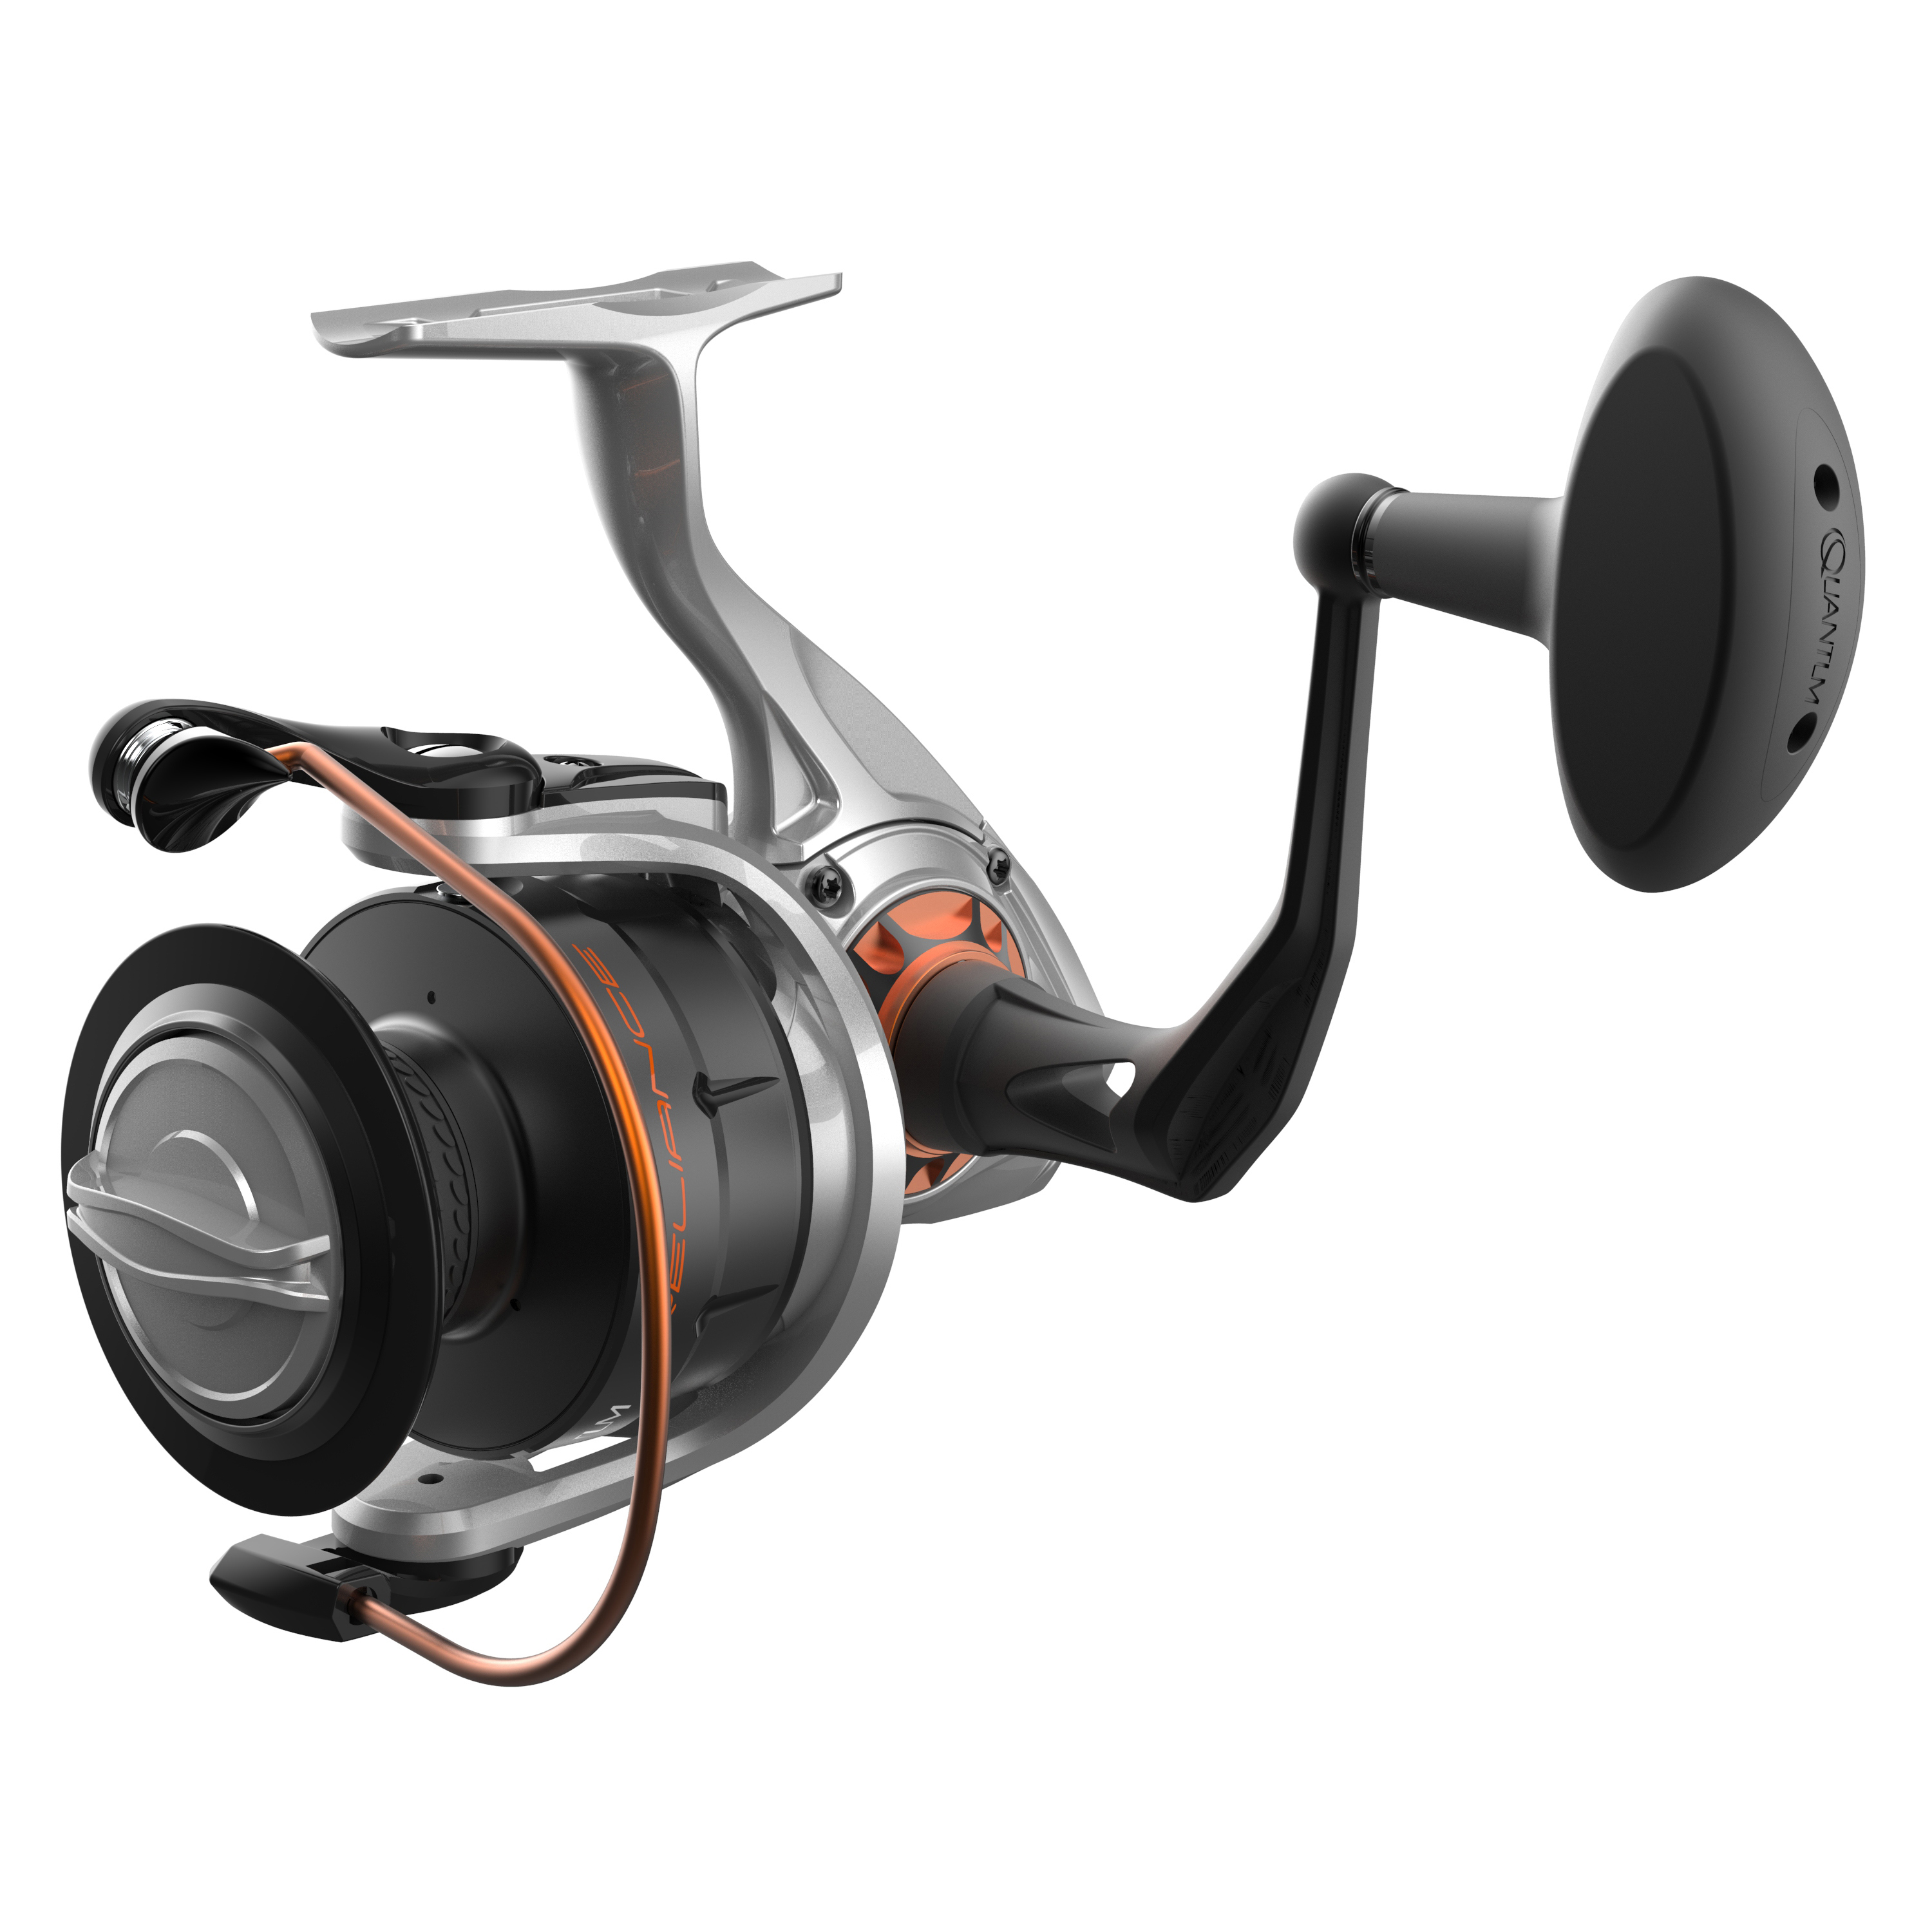 Reliance Spinning Combo, Quantum Reliance, , Quality  Fishing Gear